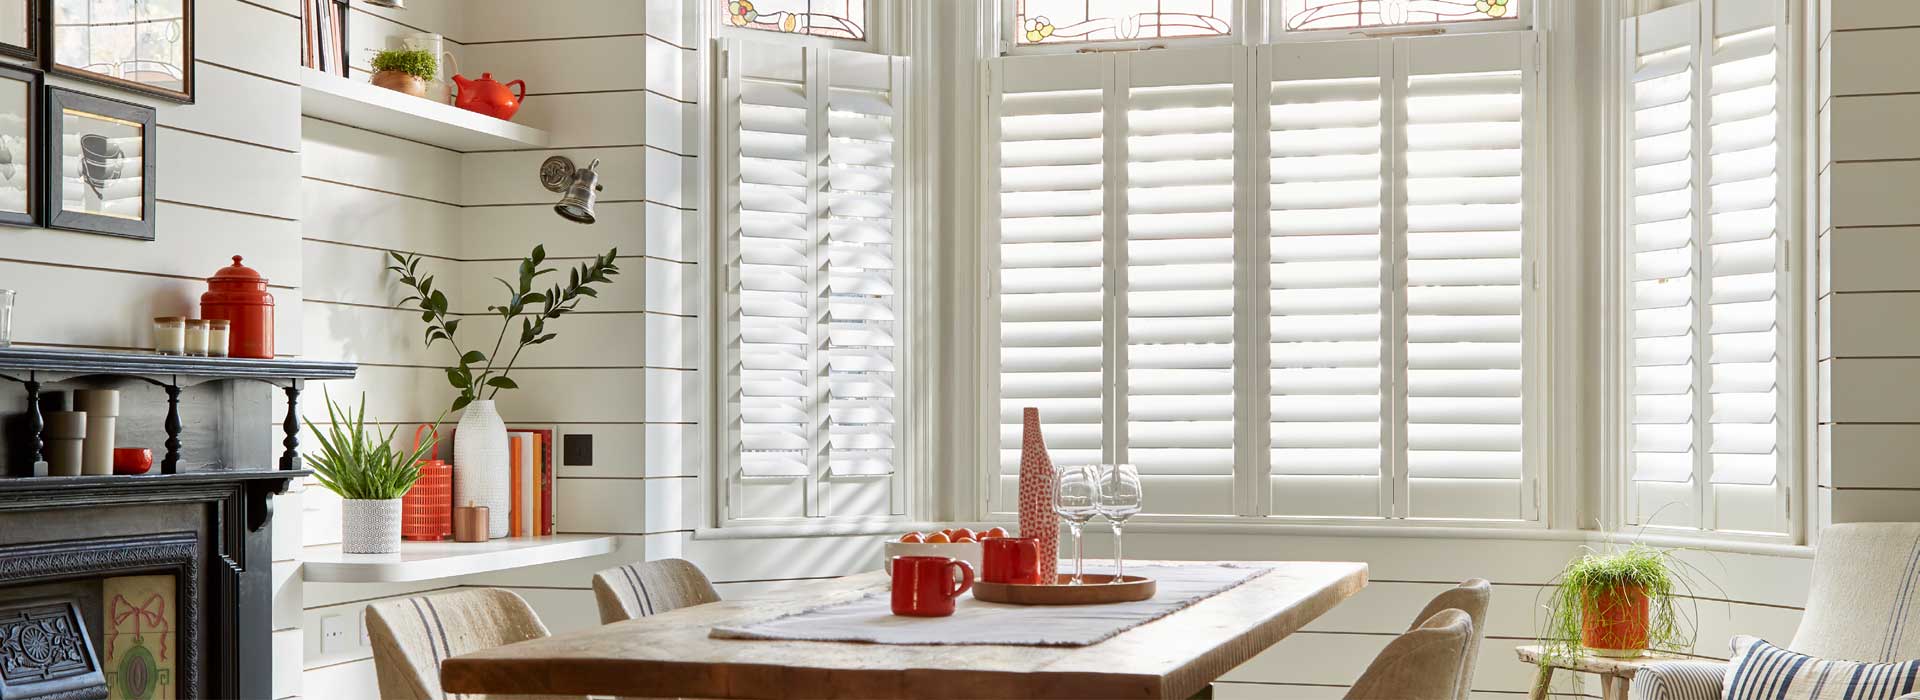 cafe-style shutters